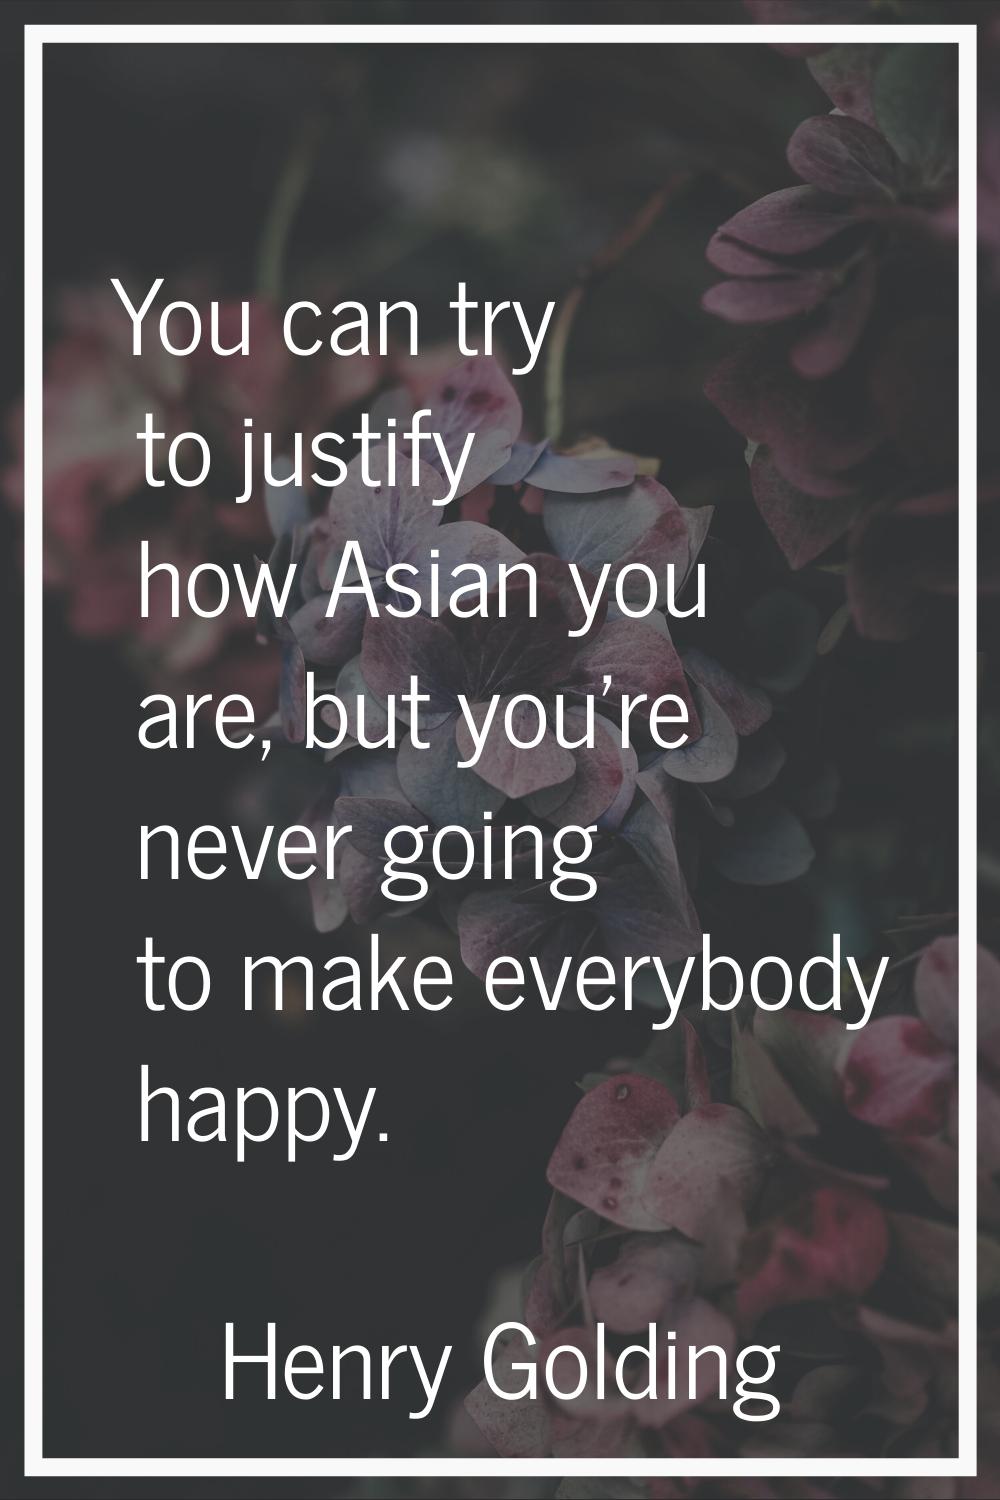 You can try to justify how Asian you are, but you're never going to make everybody happy.